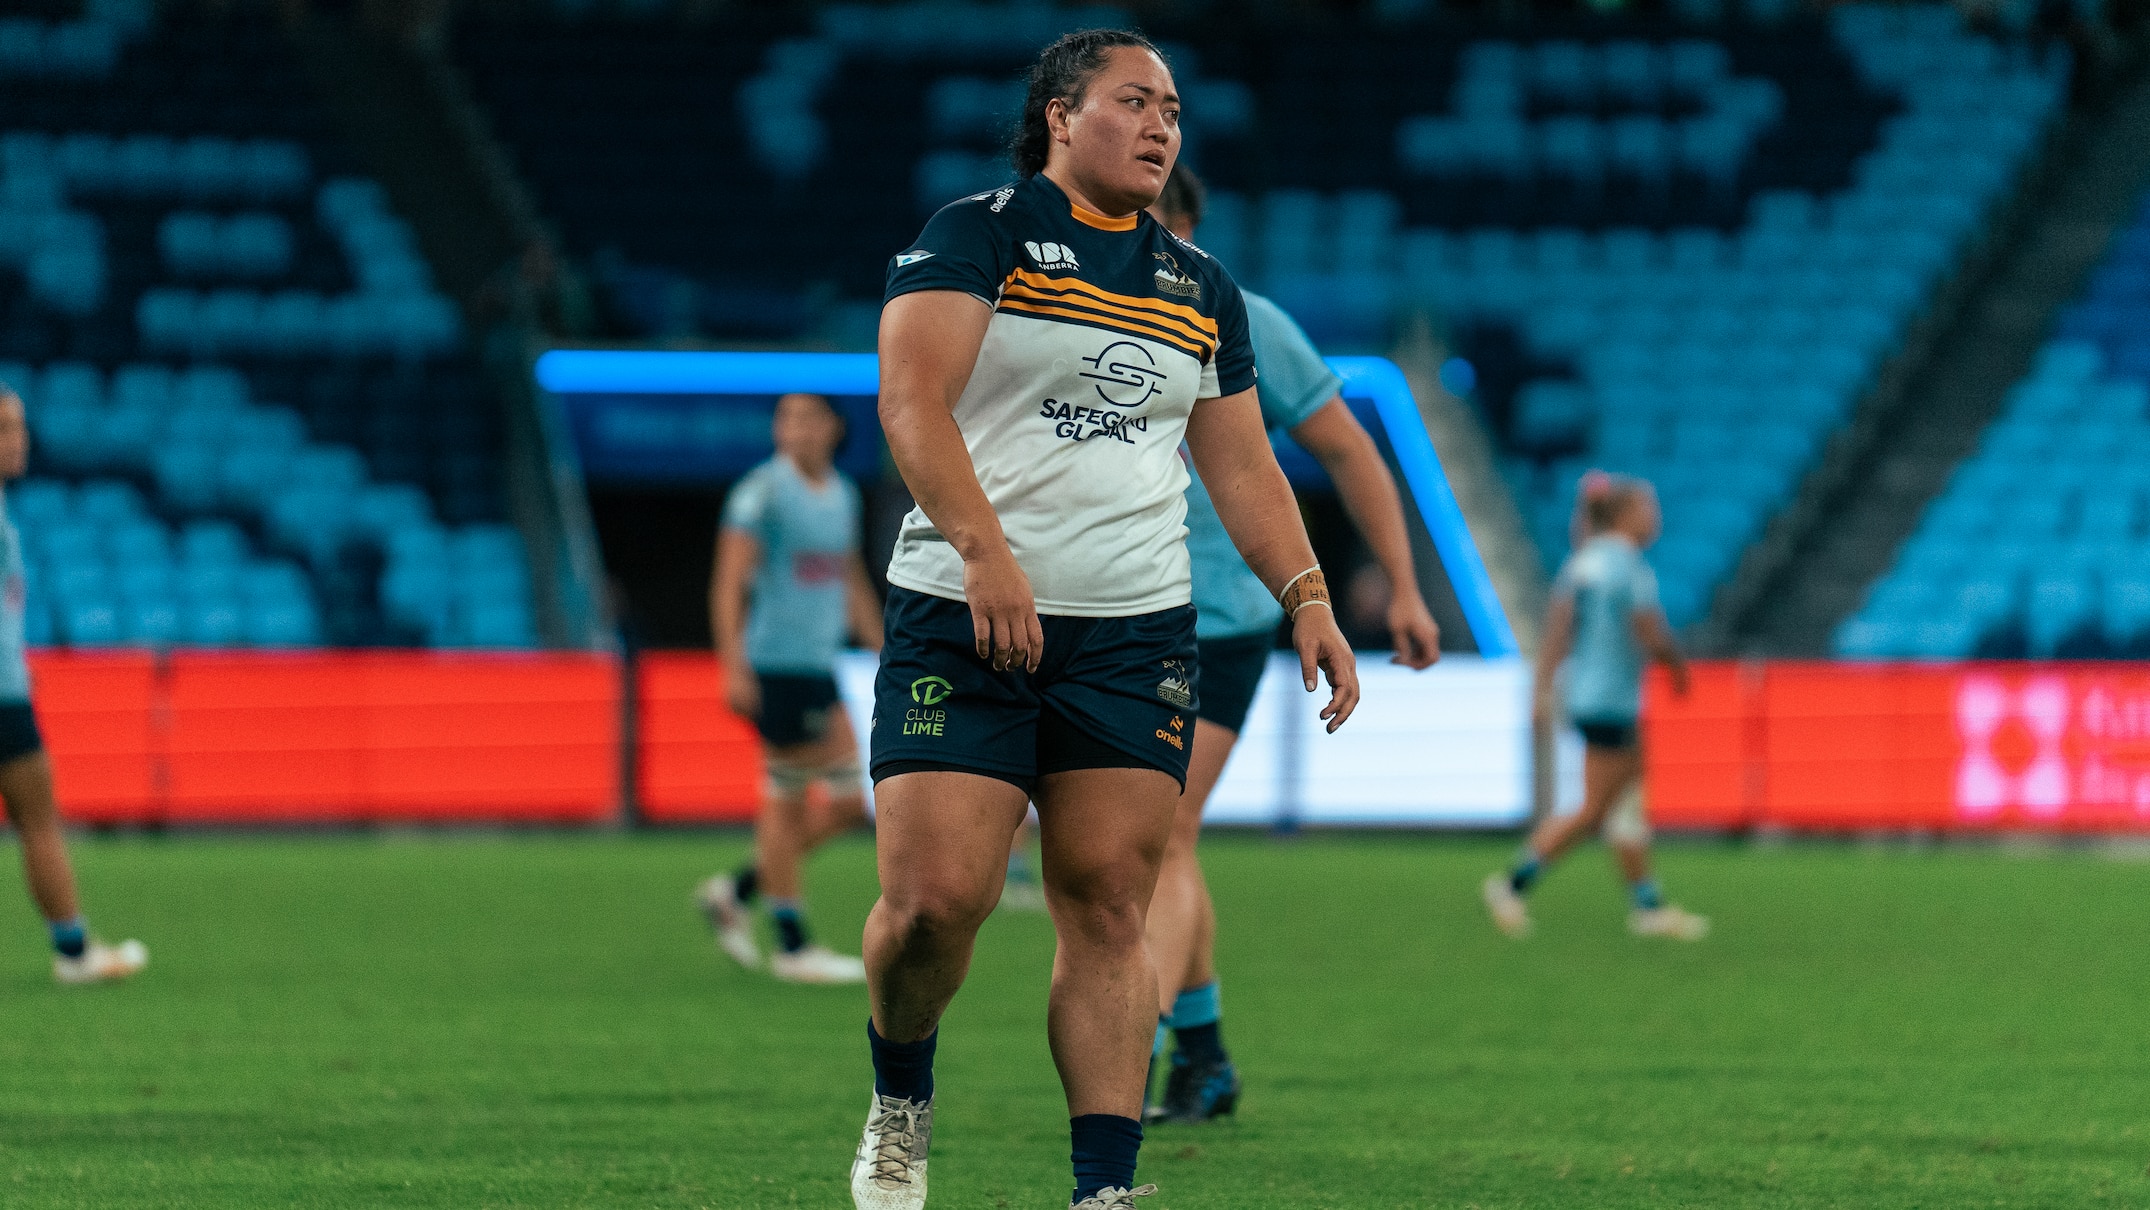 rugby union prop sally fuesaina thought her excessive fatigue was normal. it took a routine blood test to diagnose iron deficiency